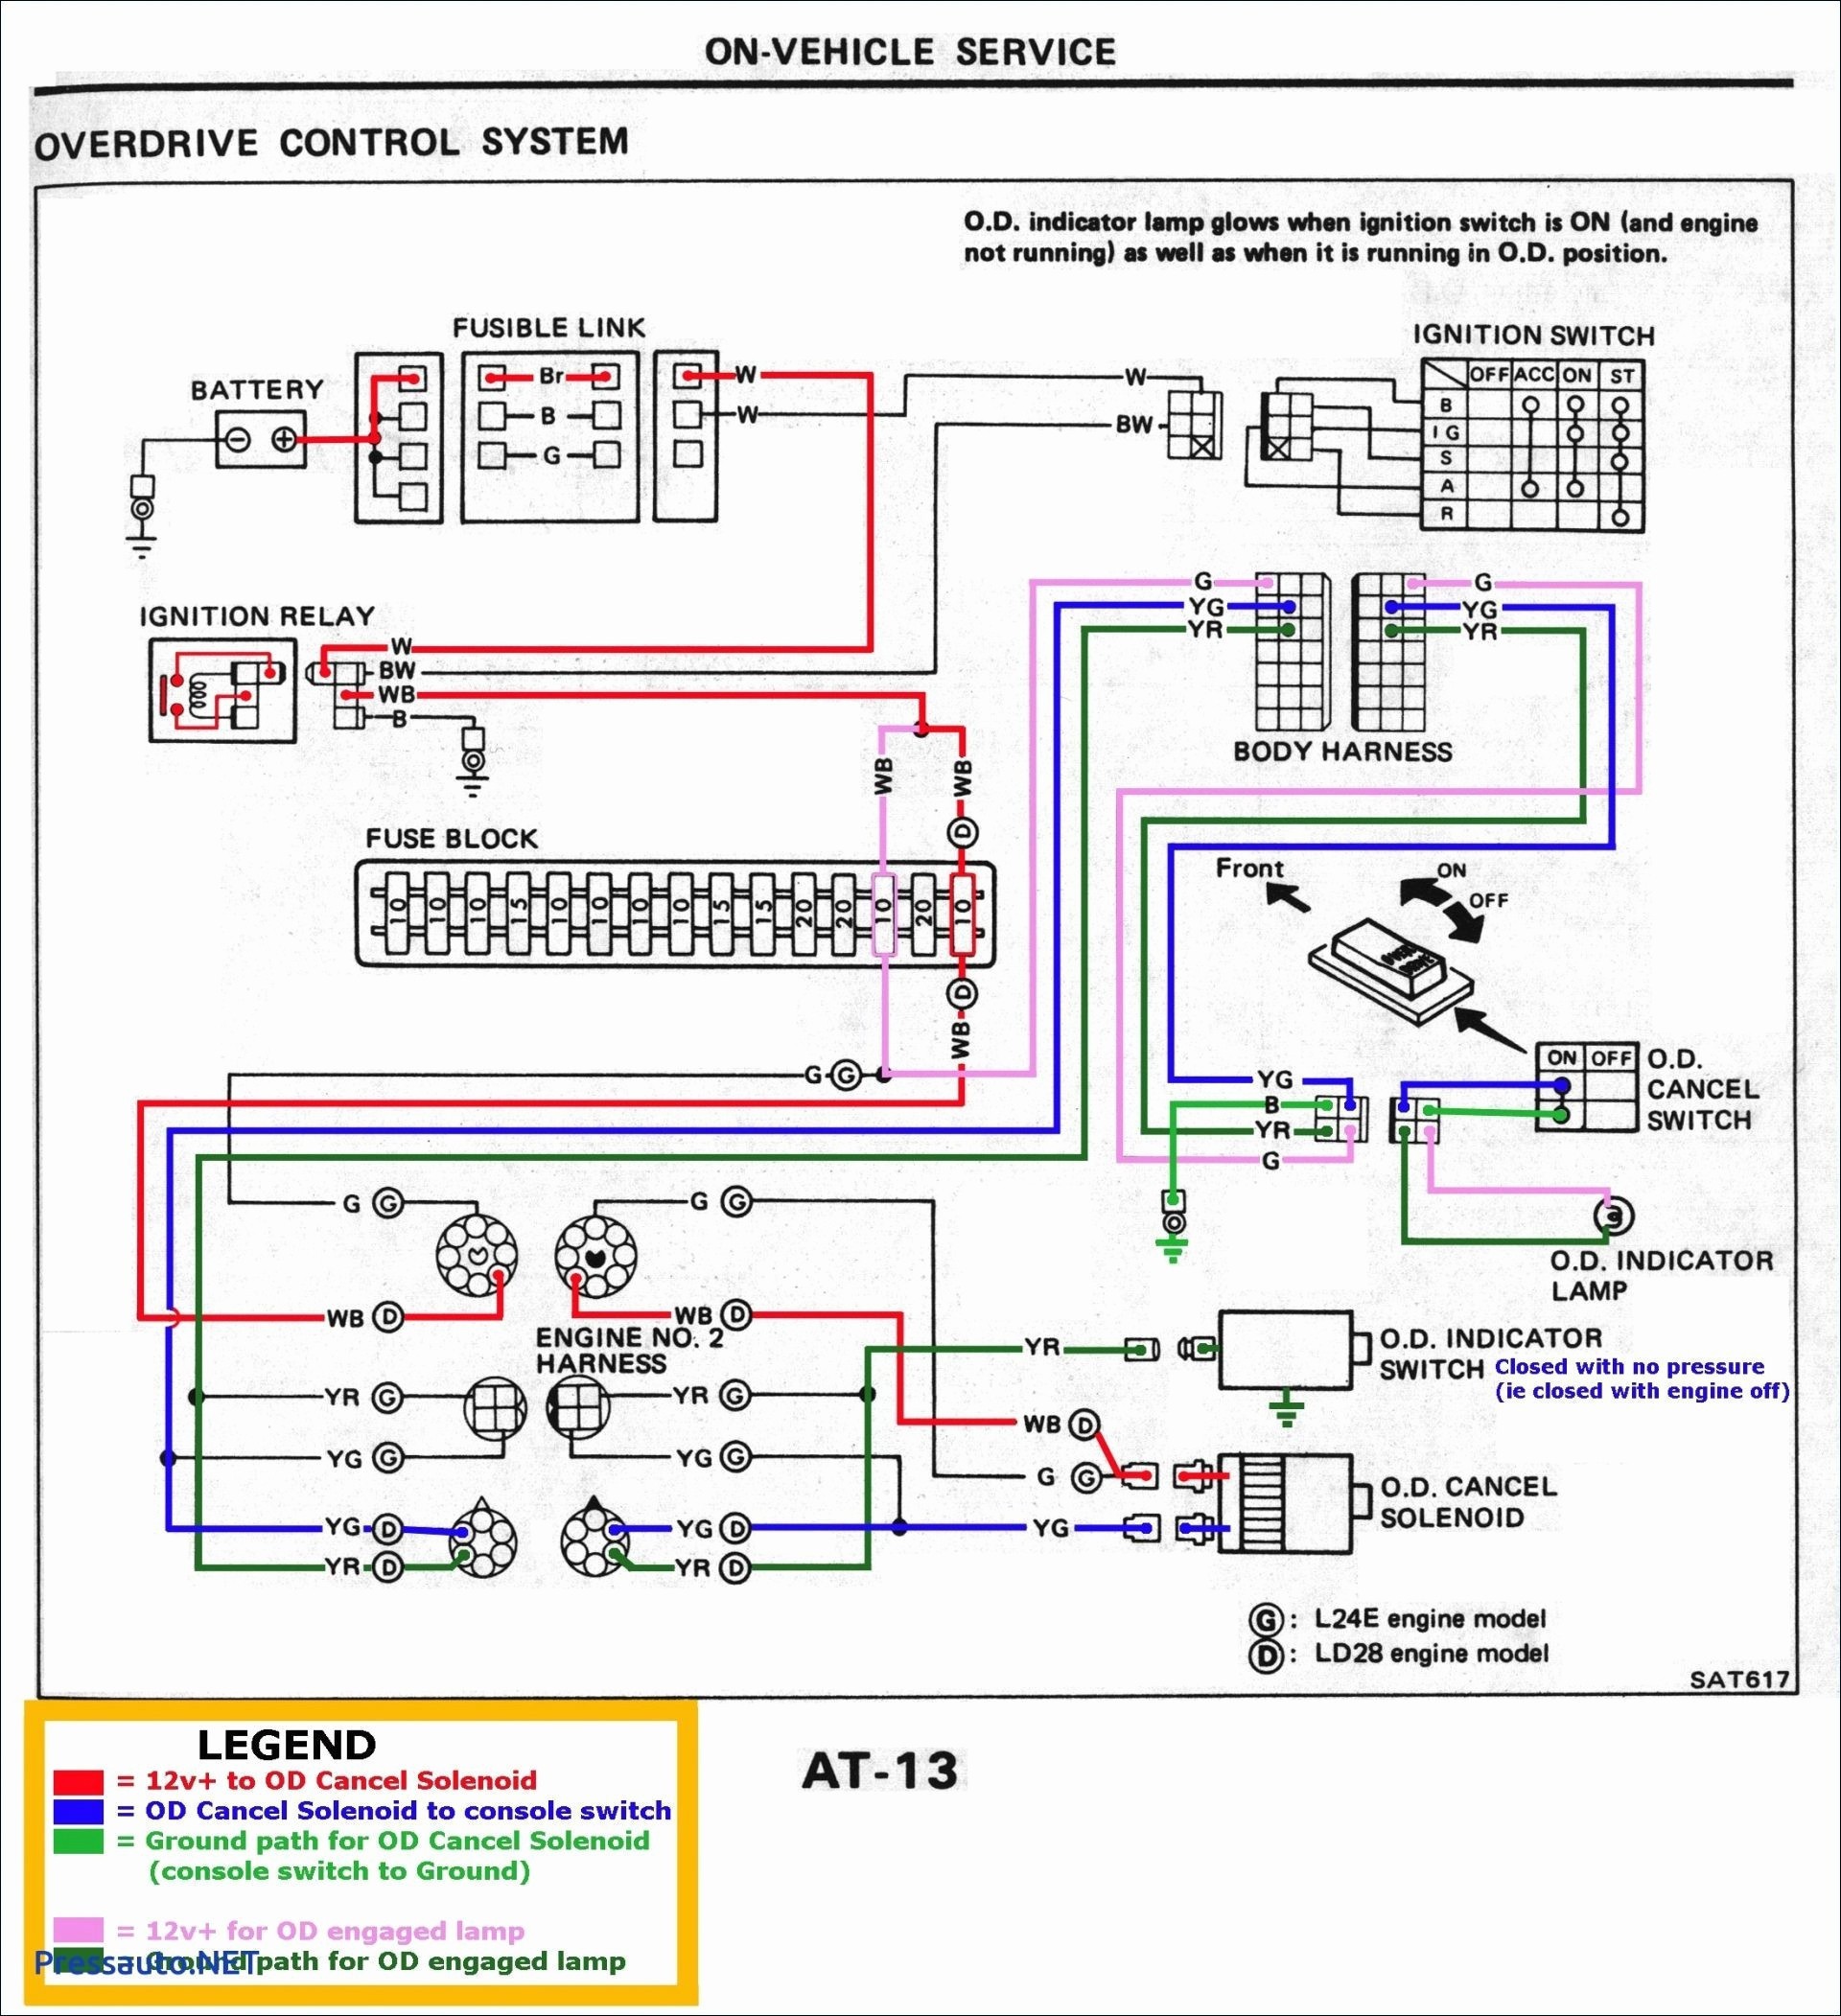 Wiring Diagram Alternator to Battery Reference Fresh Alternator Wiring Diagram for Kia